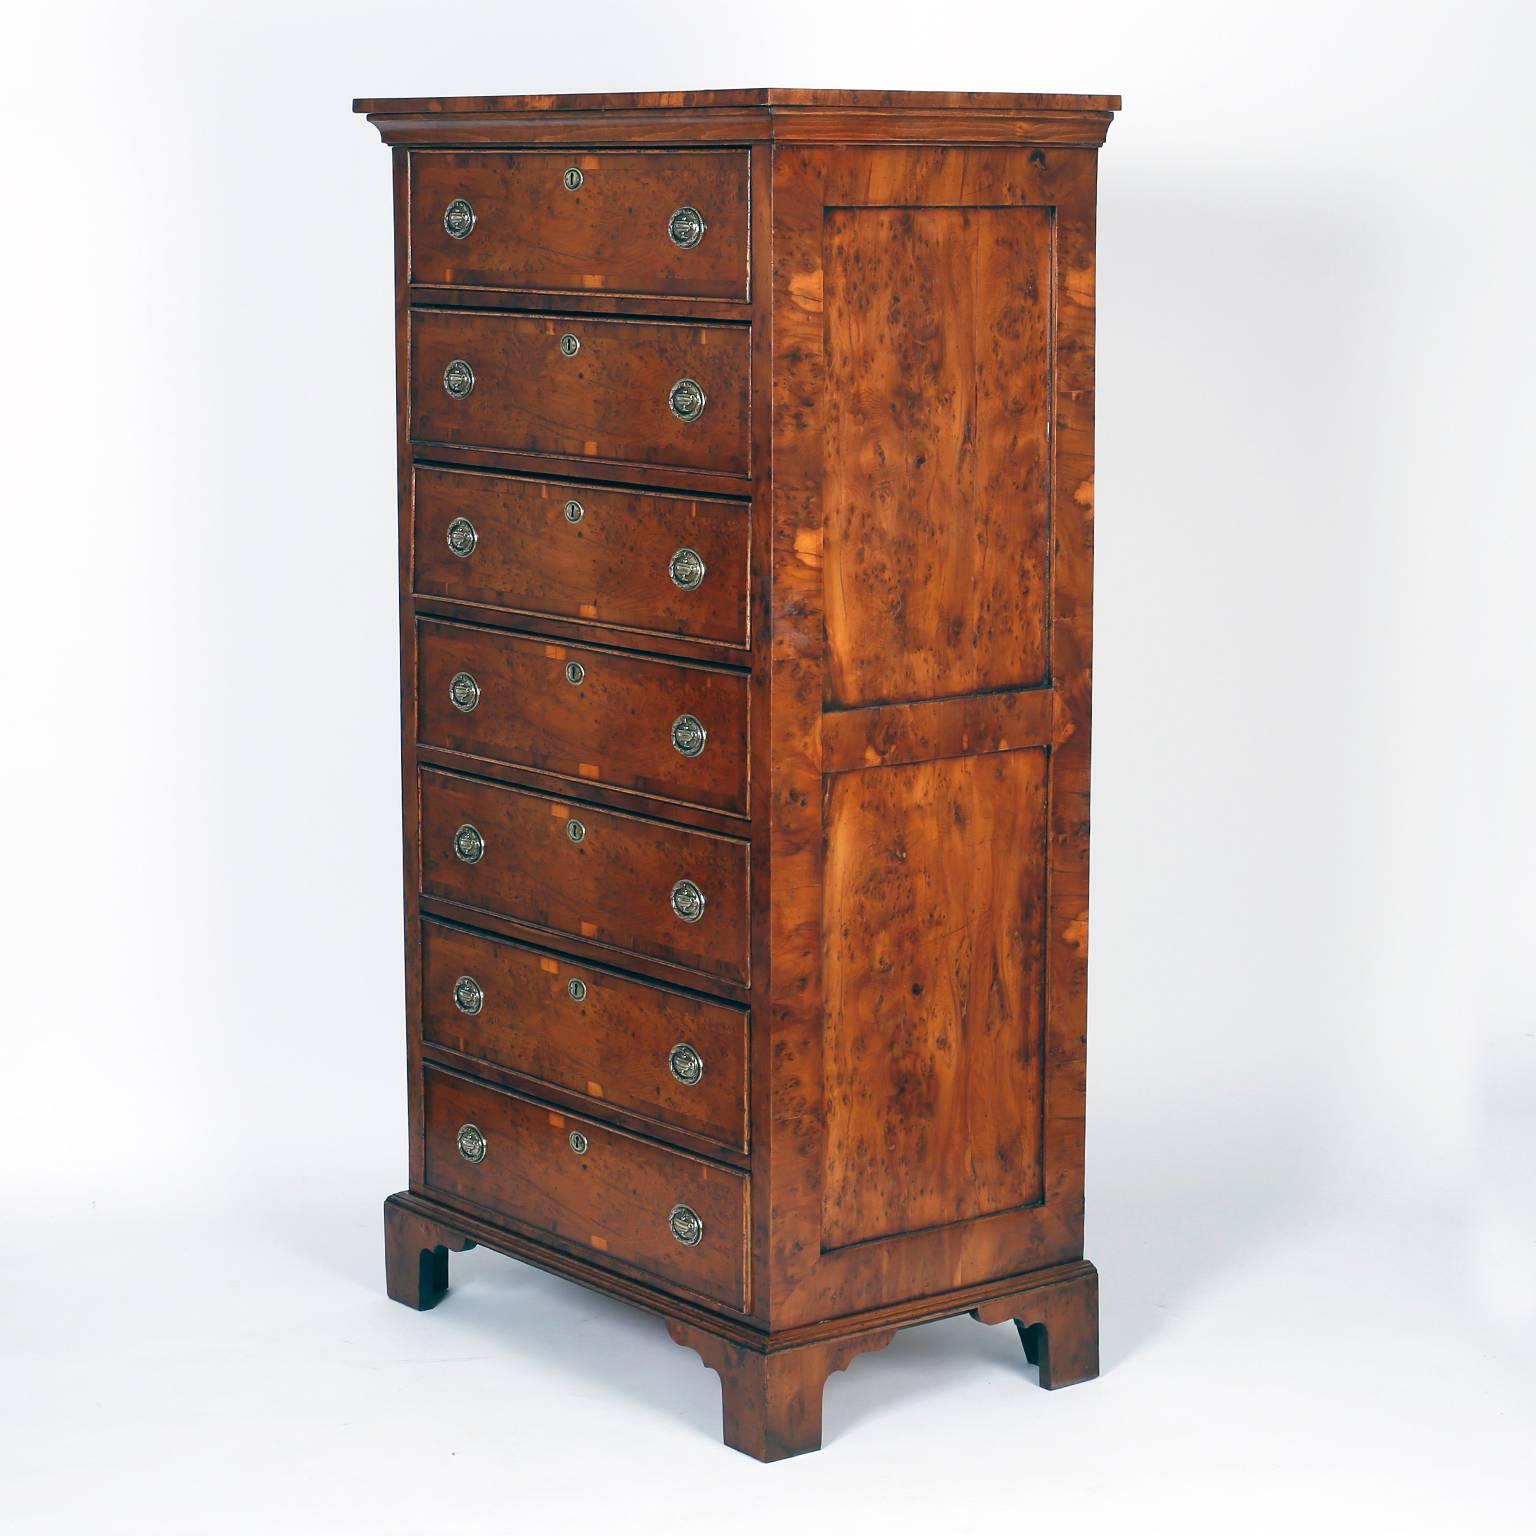 Georgian Antique English Tall Chest of Drawers